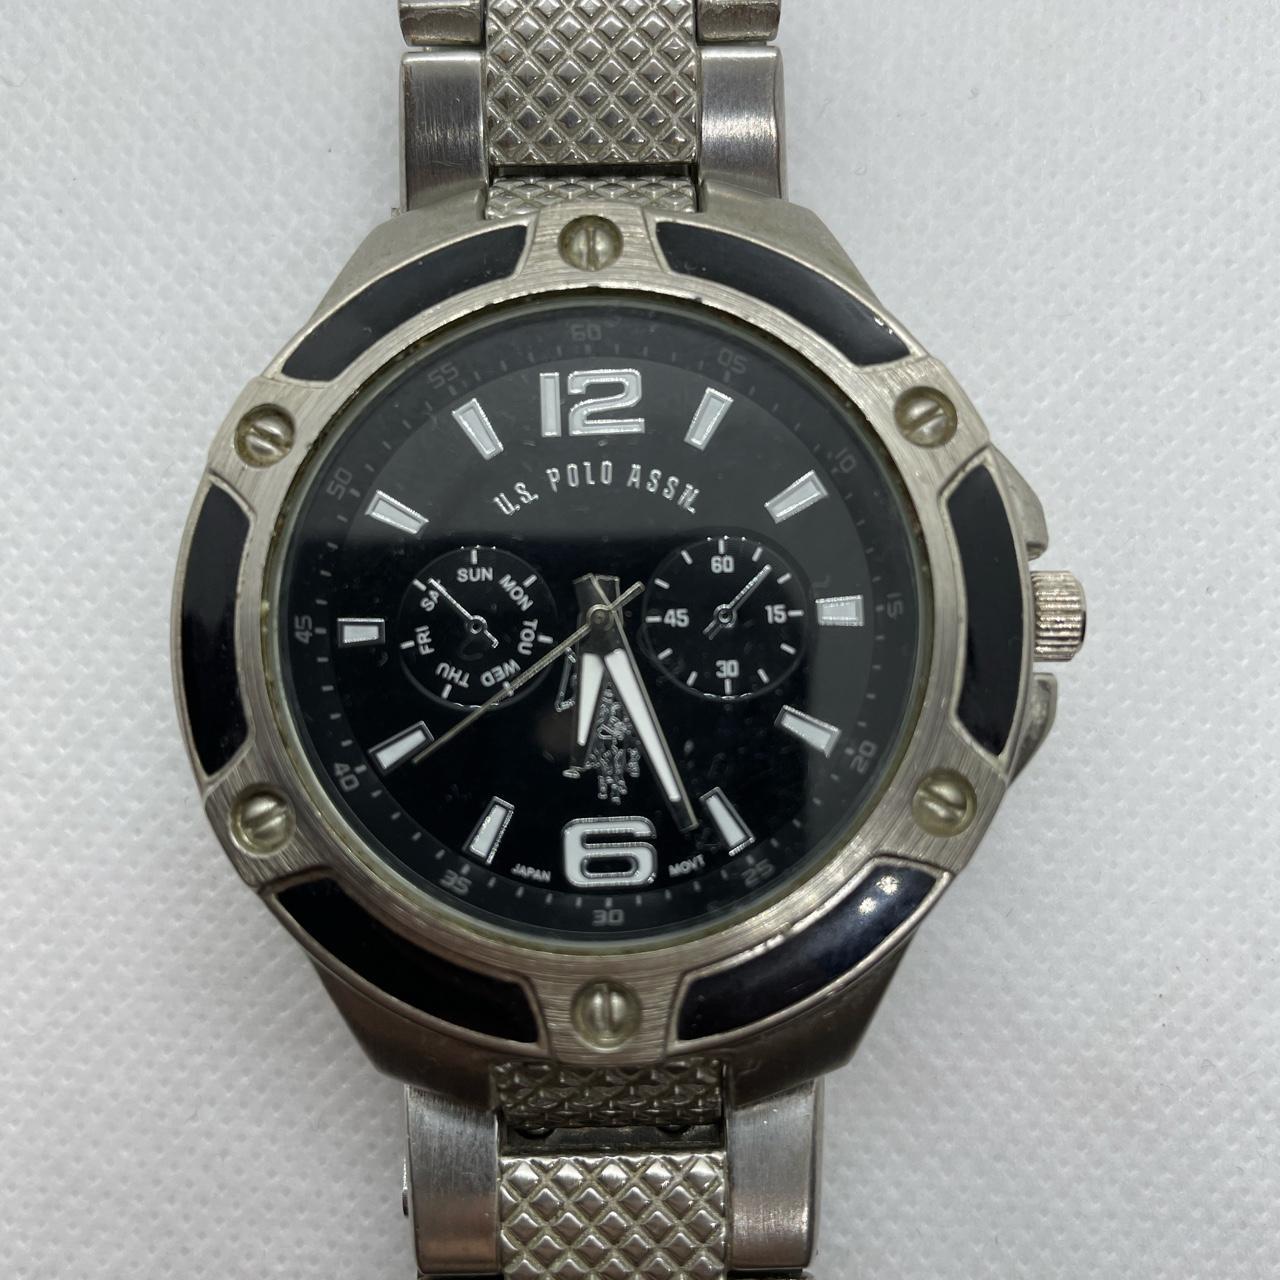 U.S. Polo Assn. Men's Silver and Black Watch